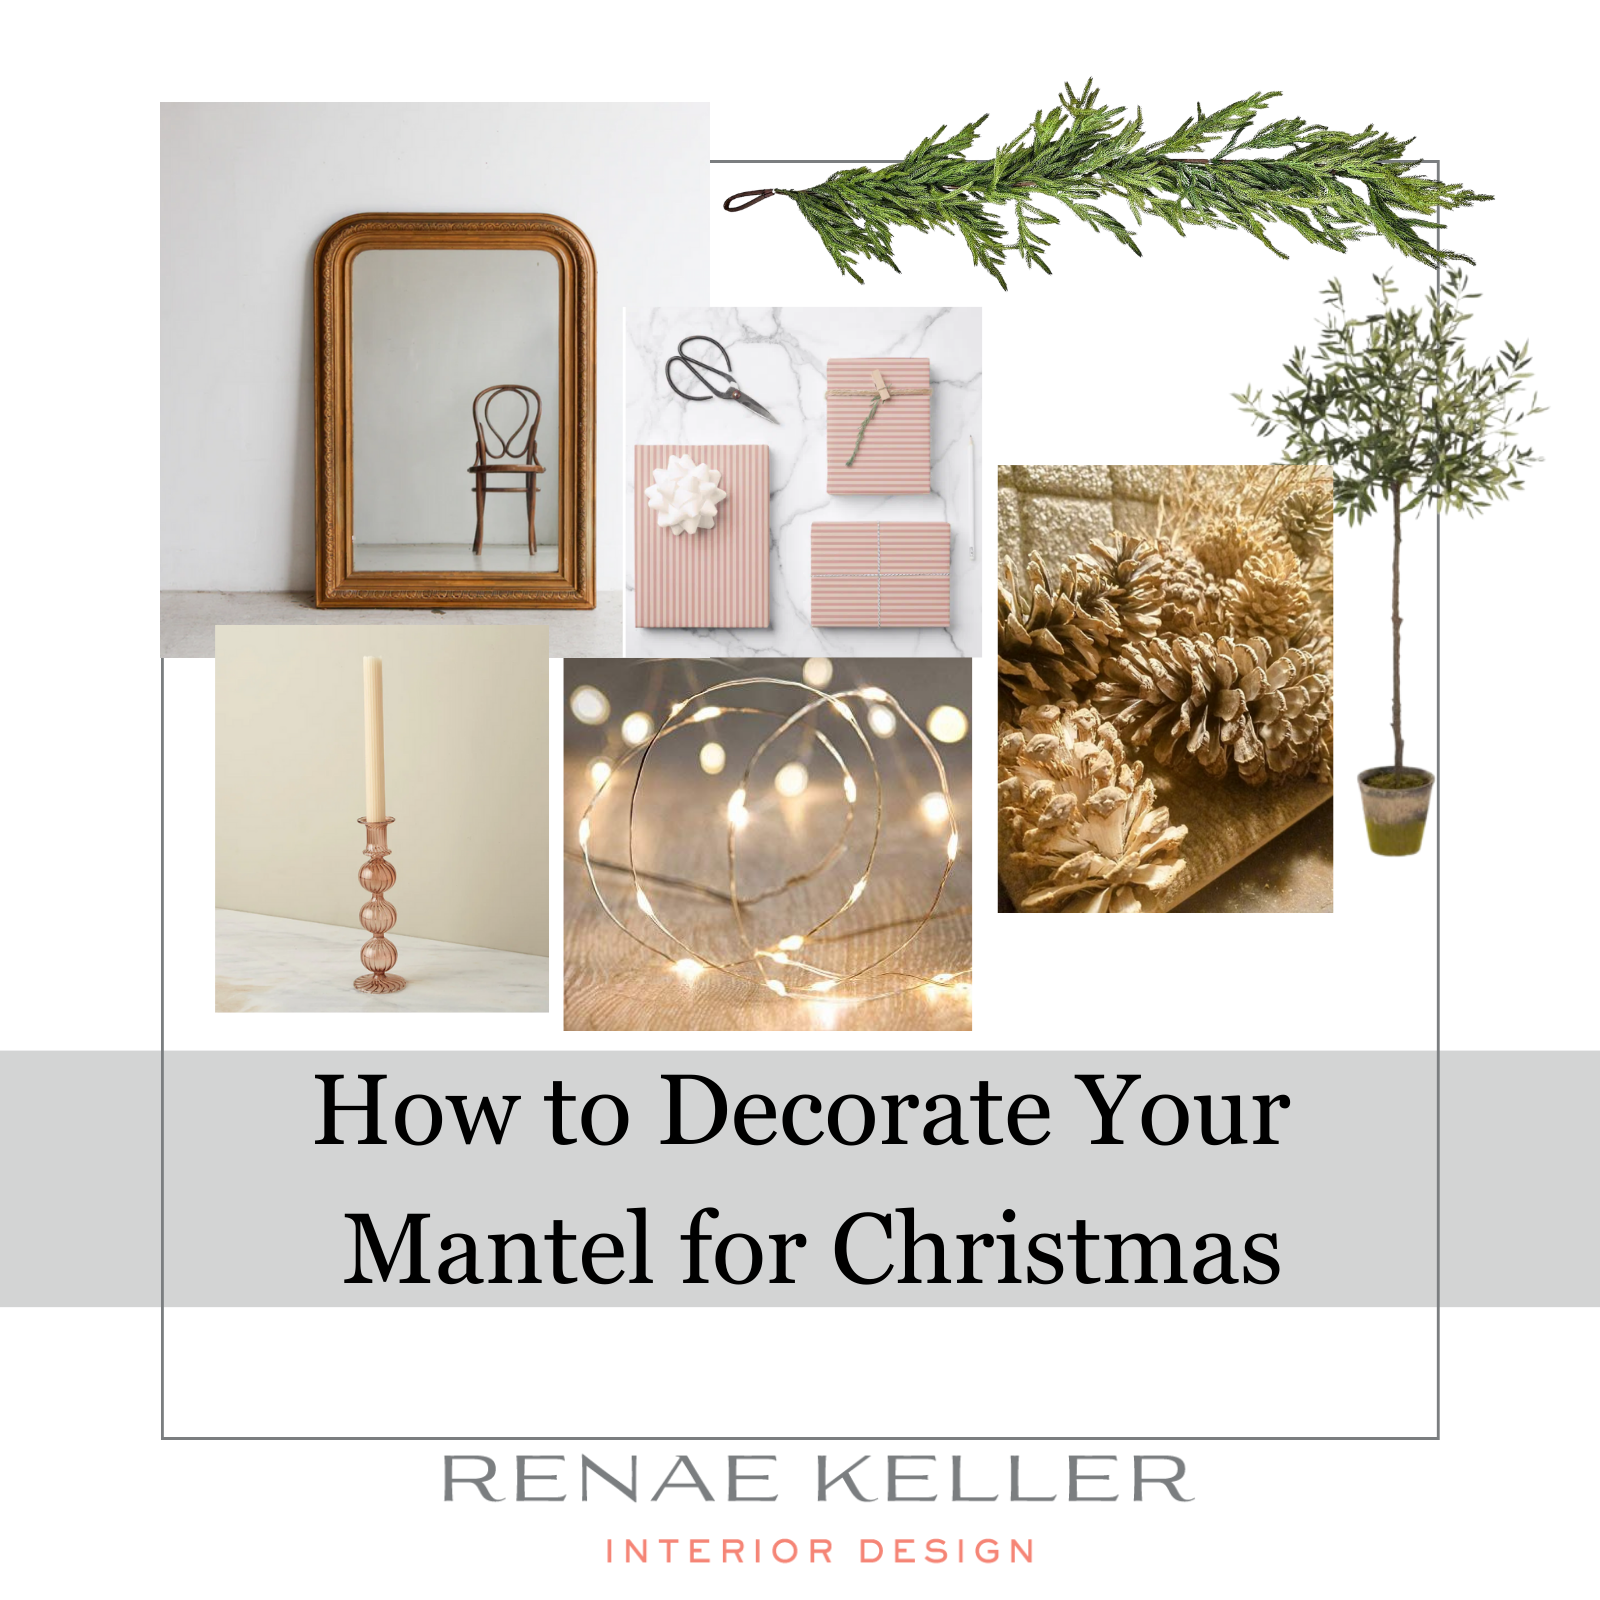 How to decorate your mantel for Christmas